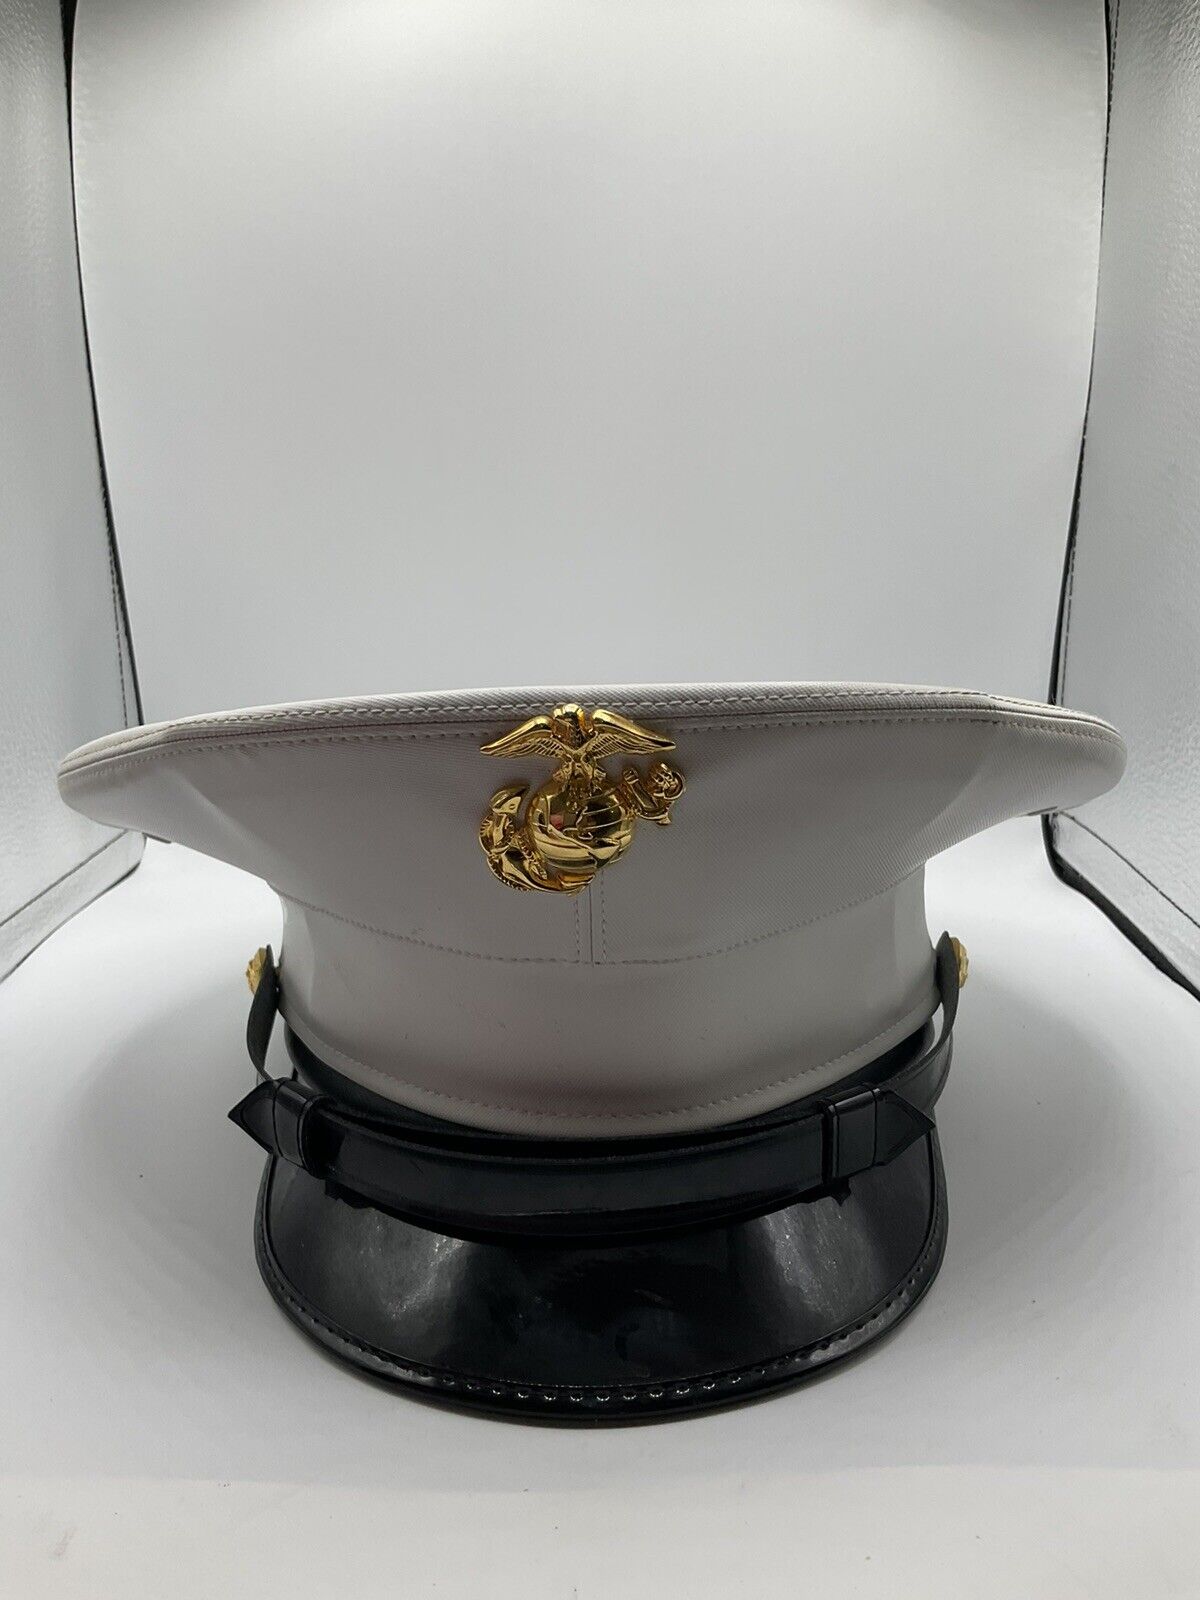 Marine Corps Kings form Size 7 White Enlisted Service Cap Good Condition Vintage